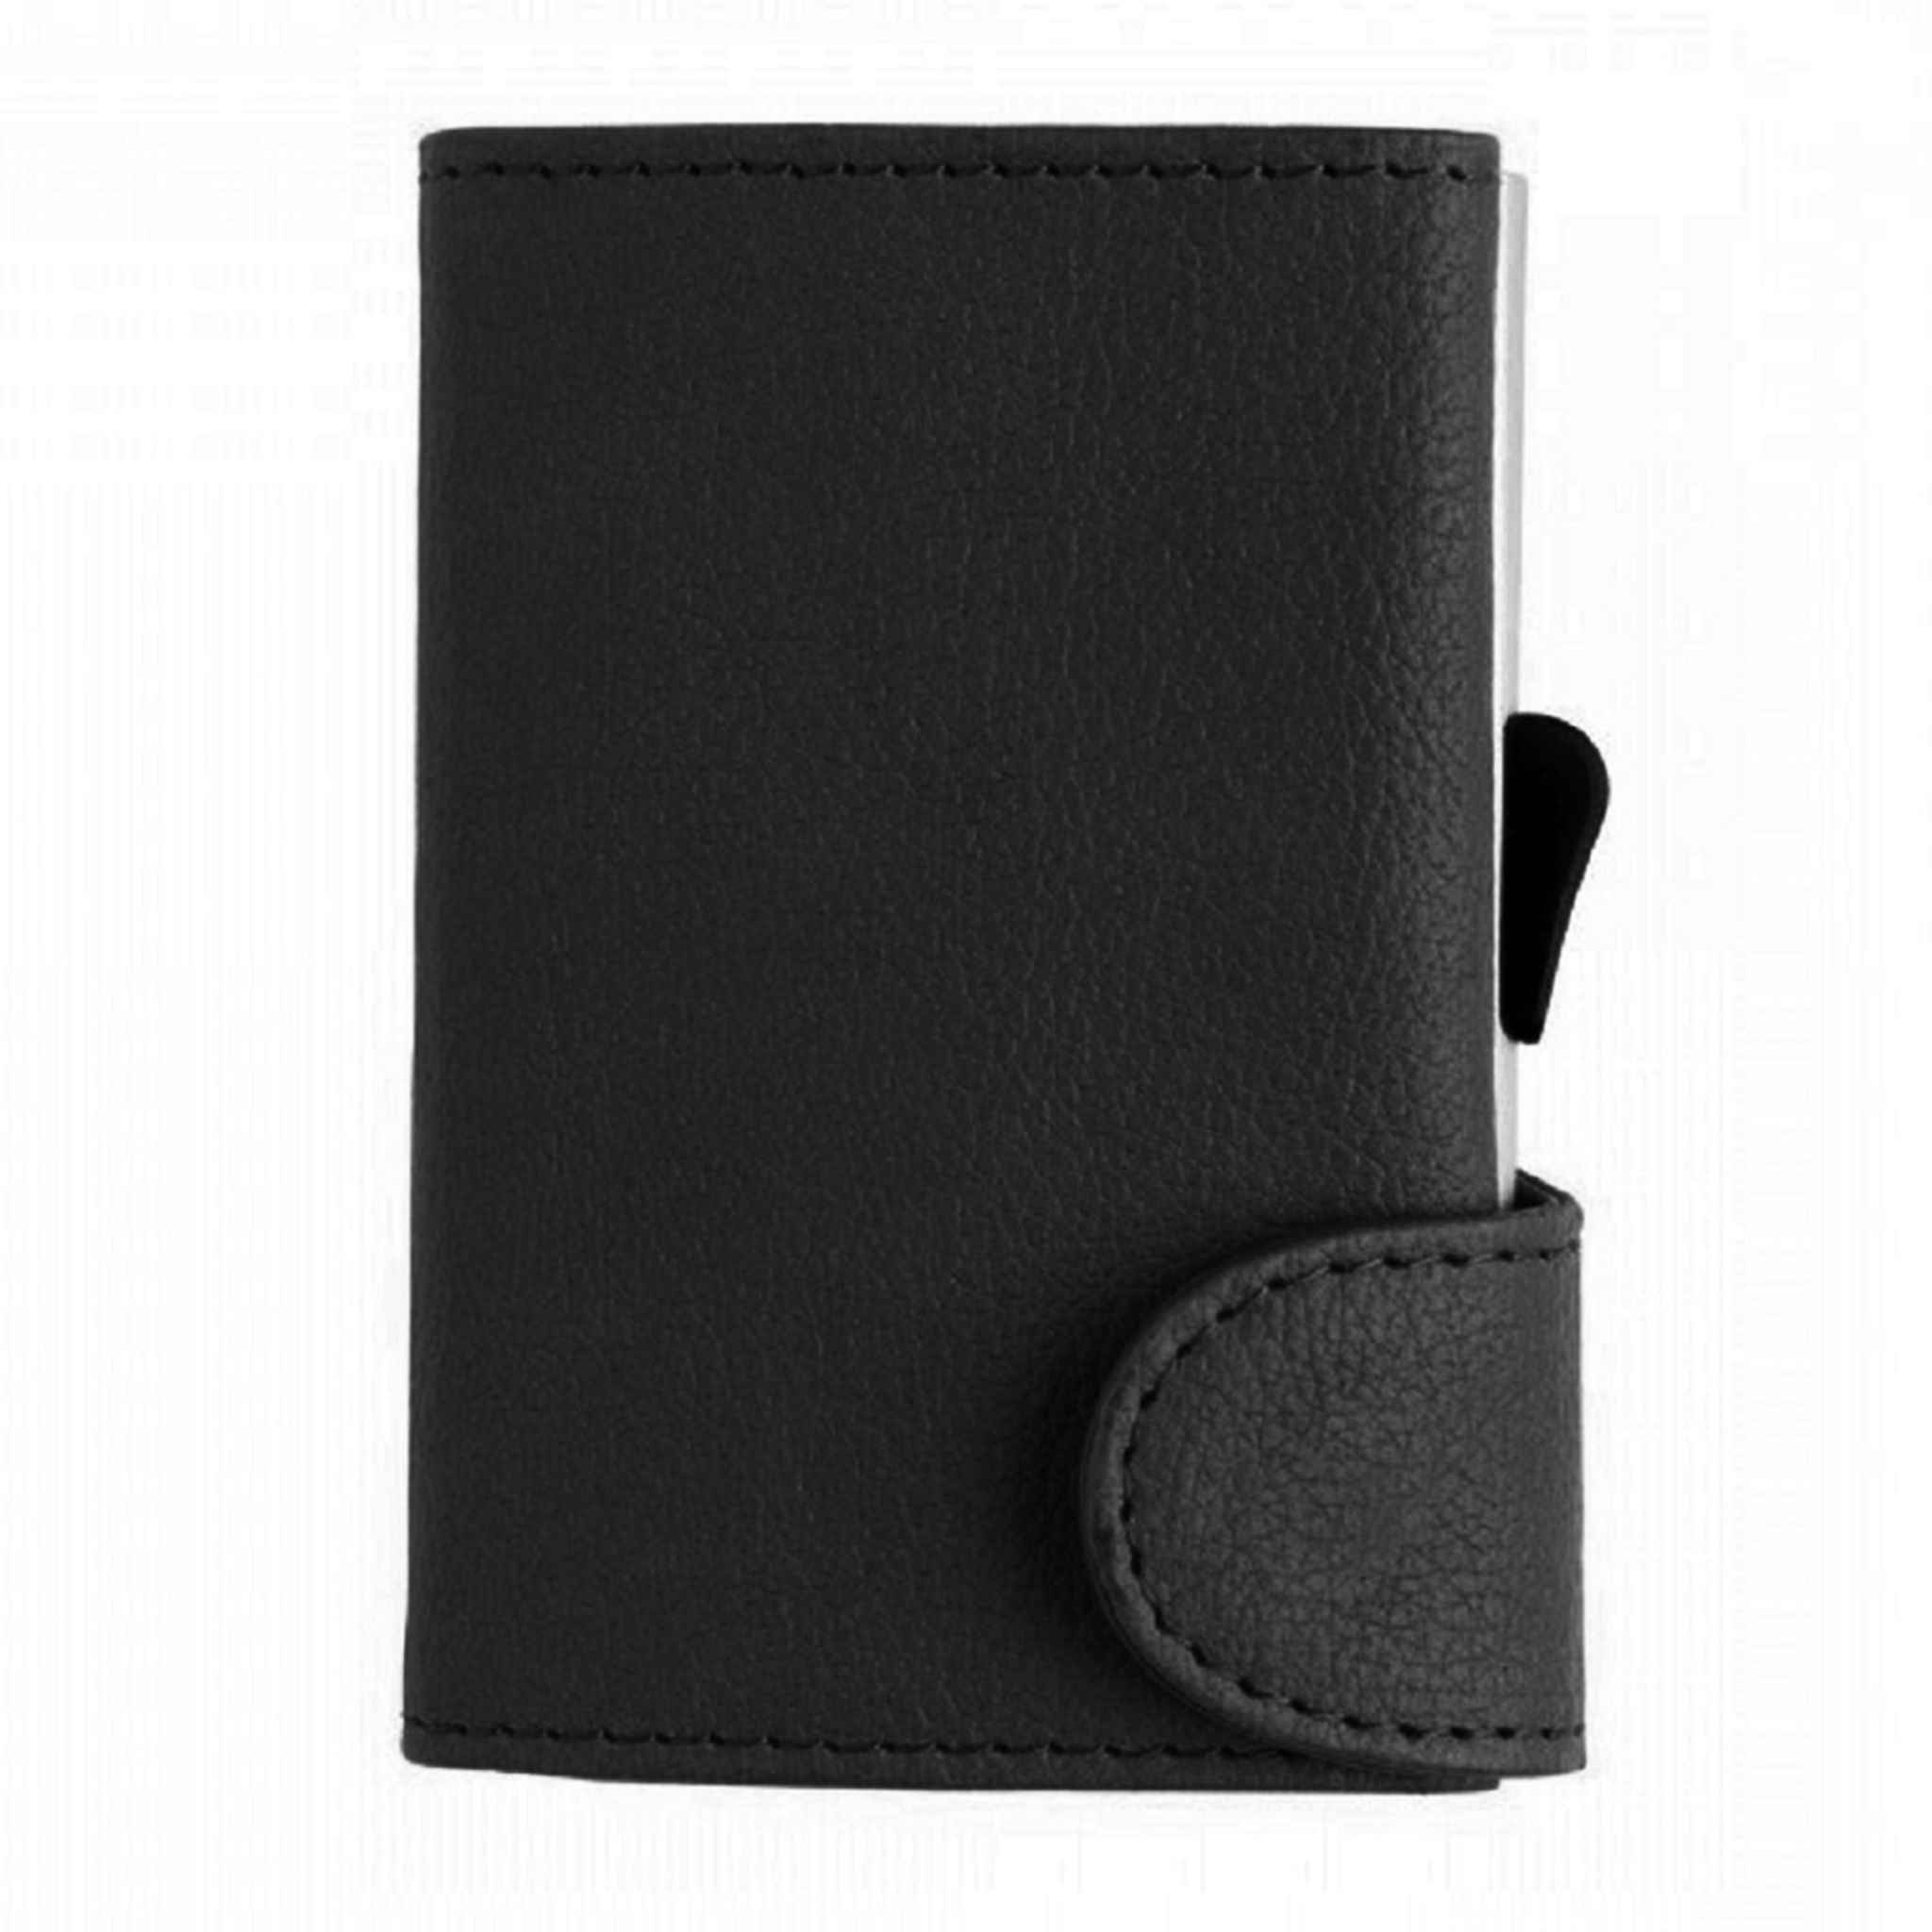 All-in-one black card holder and wallet closed